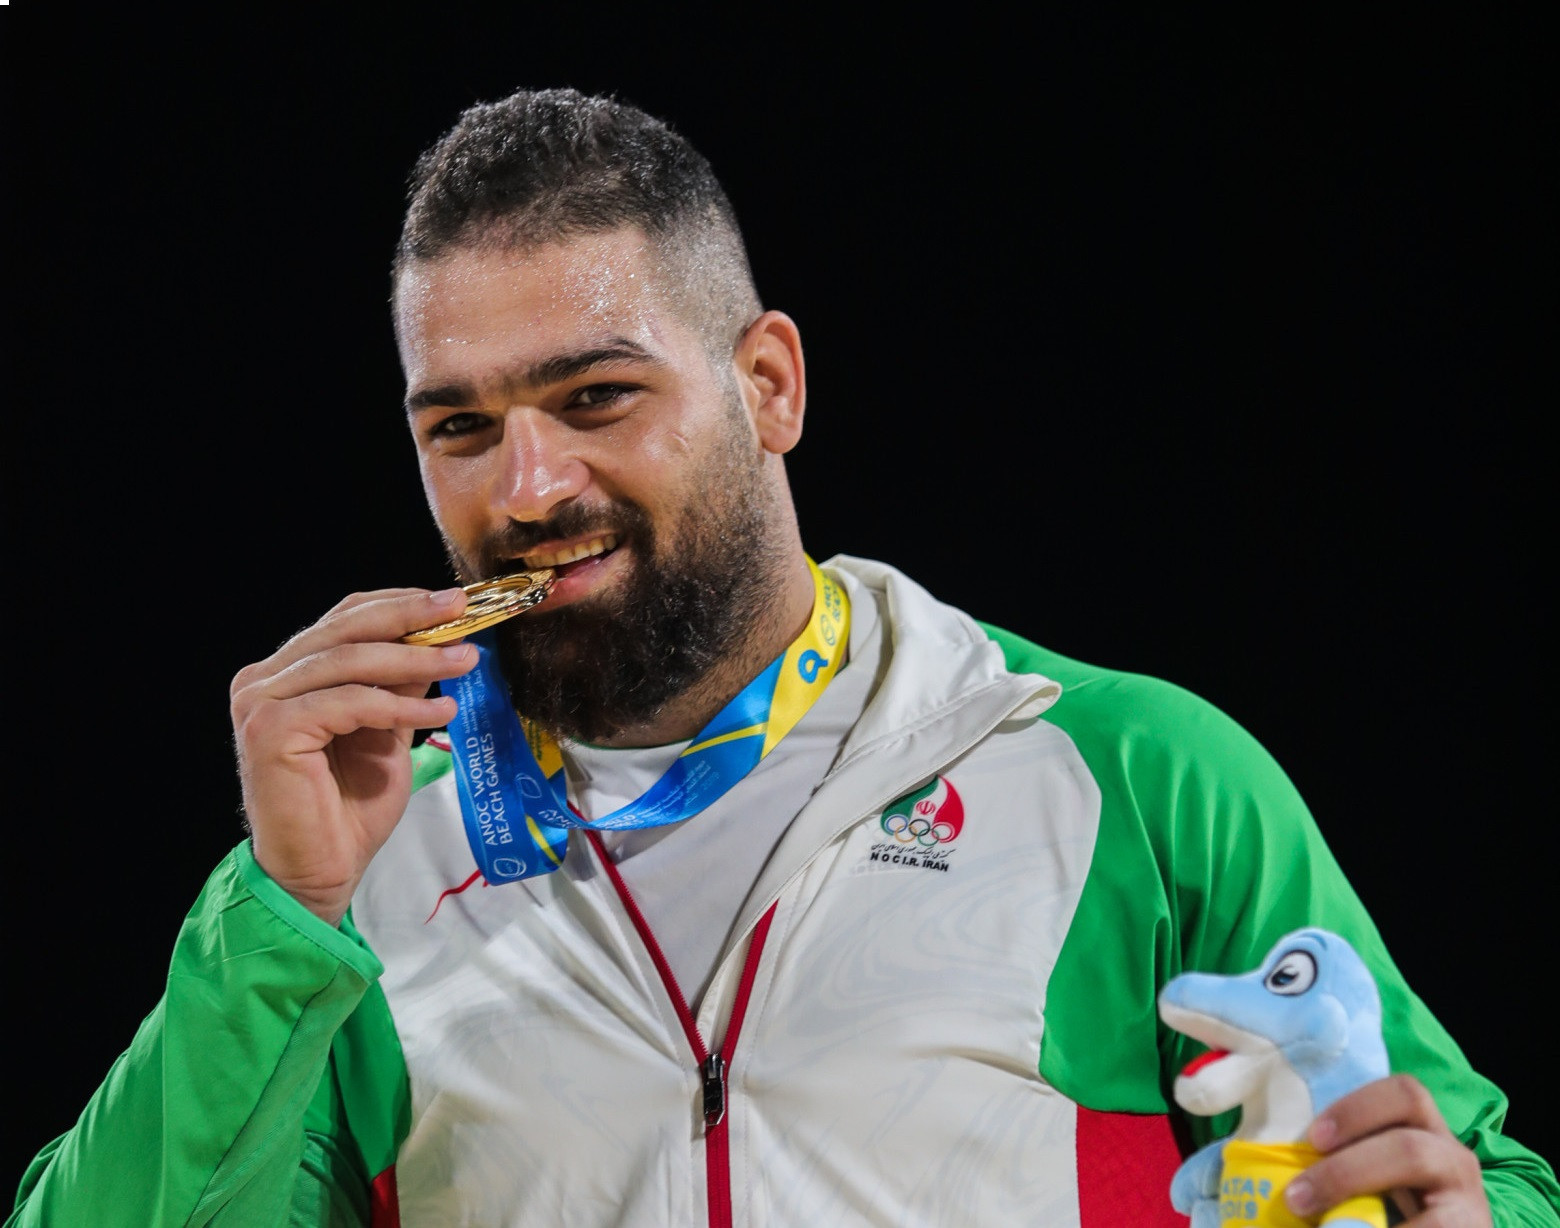 ANOC strips wrestlers Rahmani and Genesis of World Beach Games medals